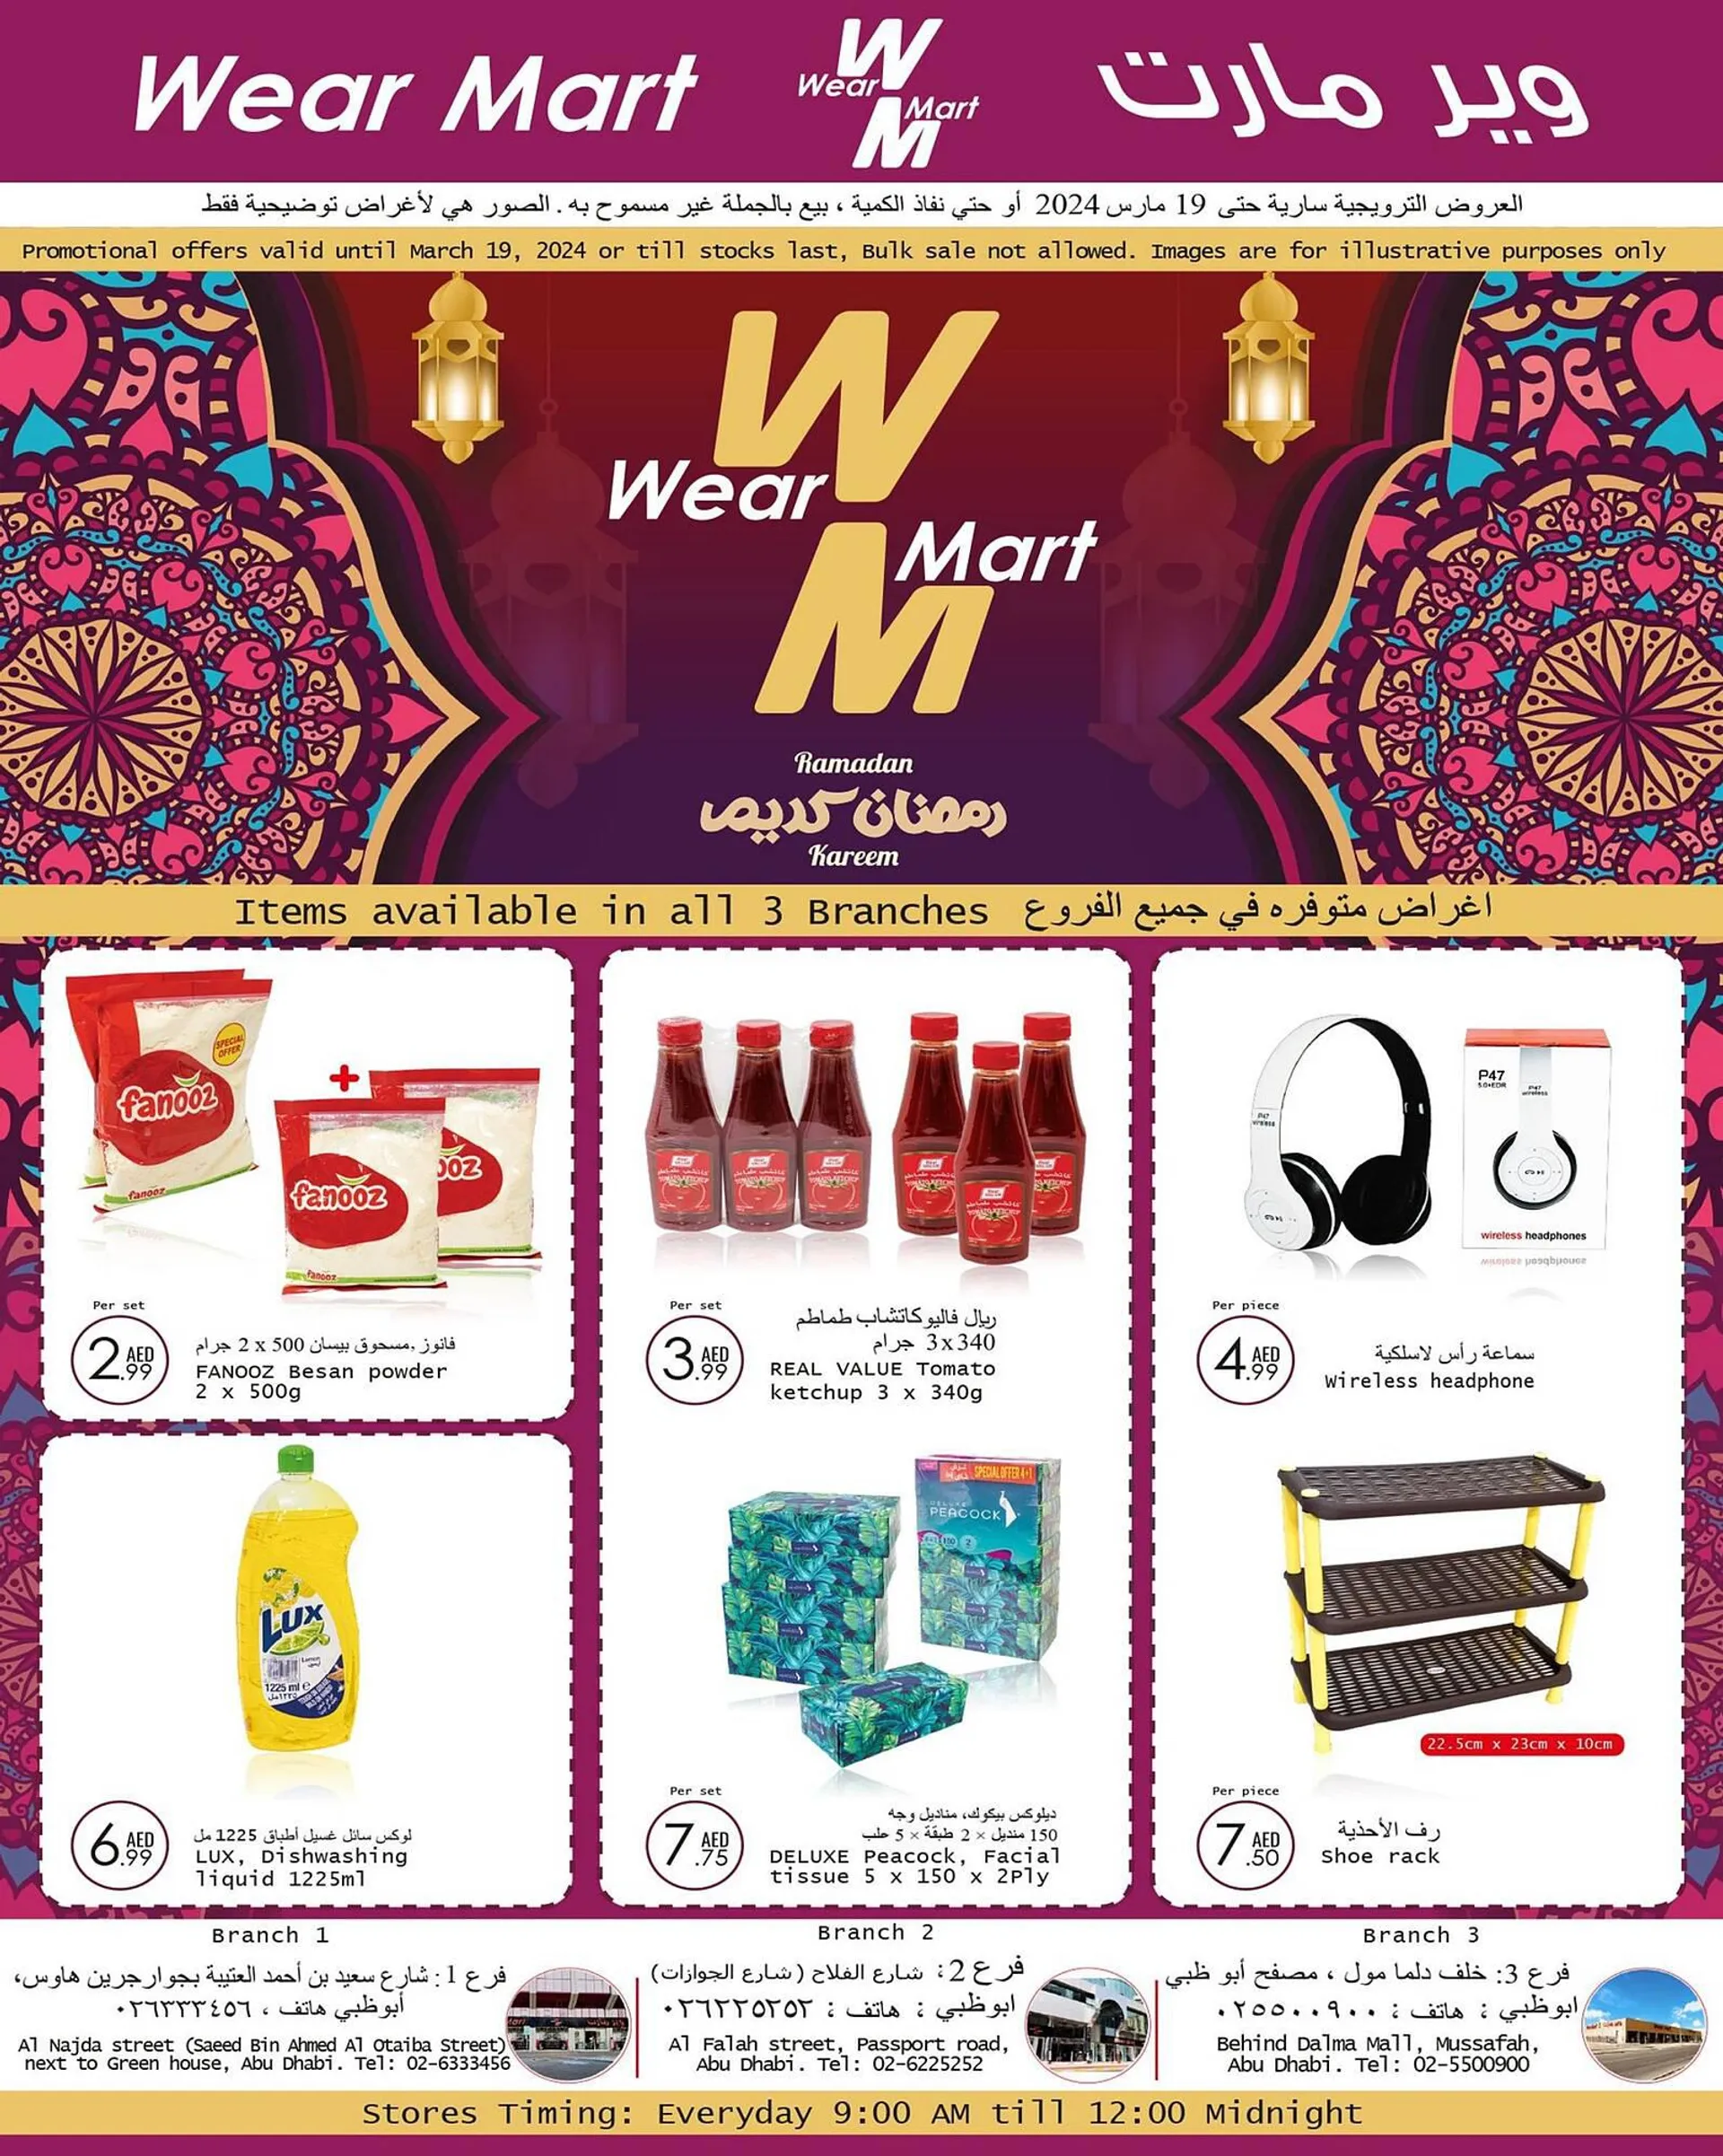 Wear Mart catalogue - 1 March 19 March 2024